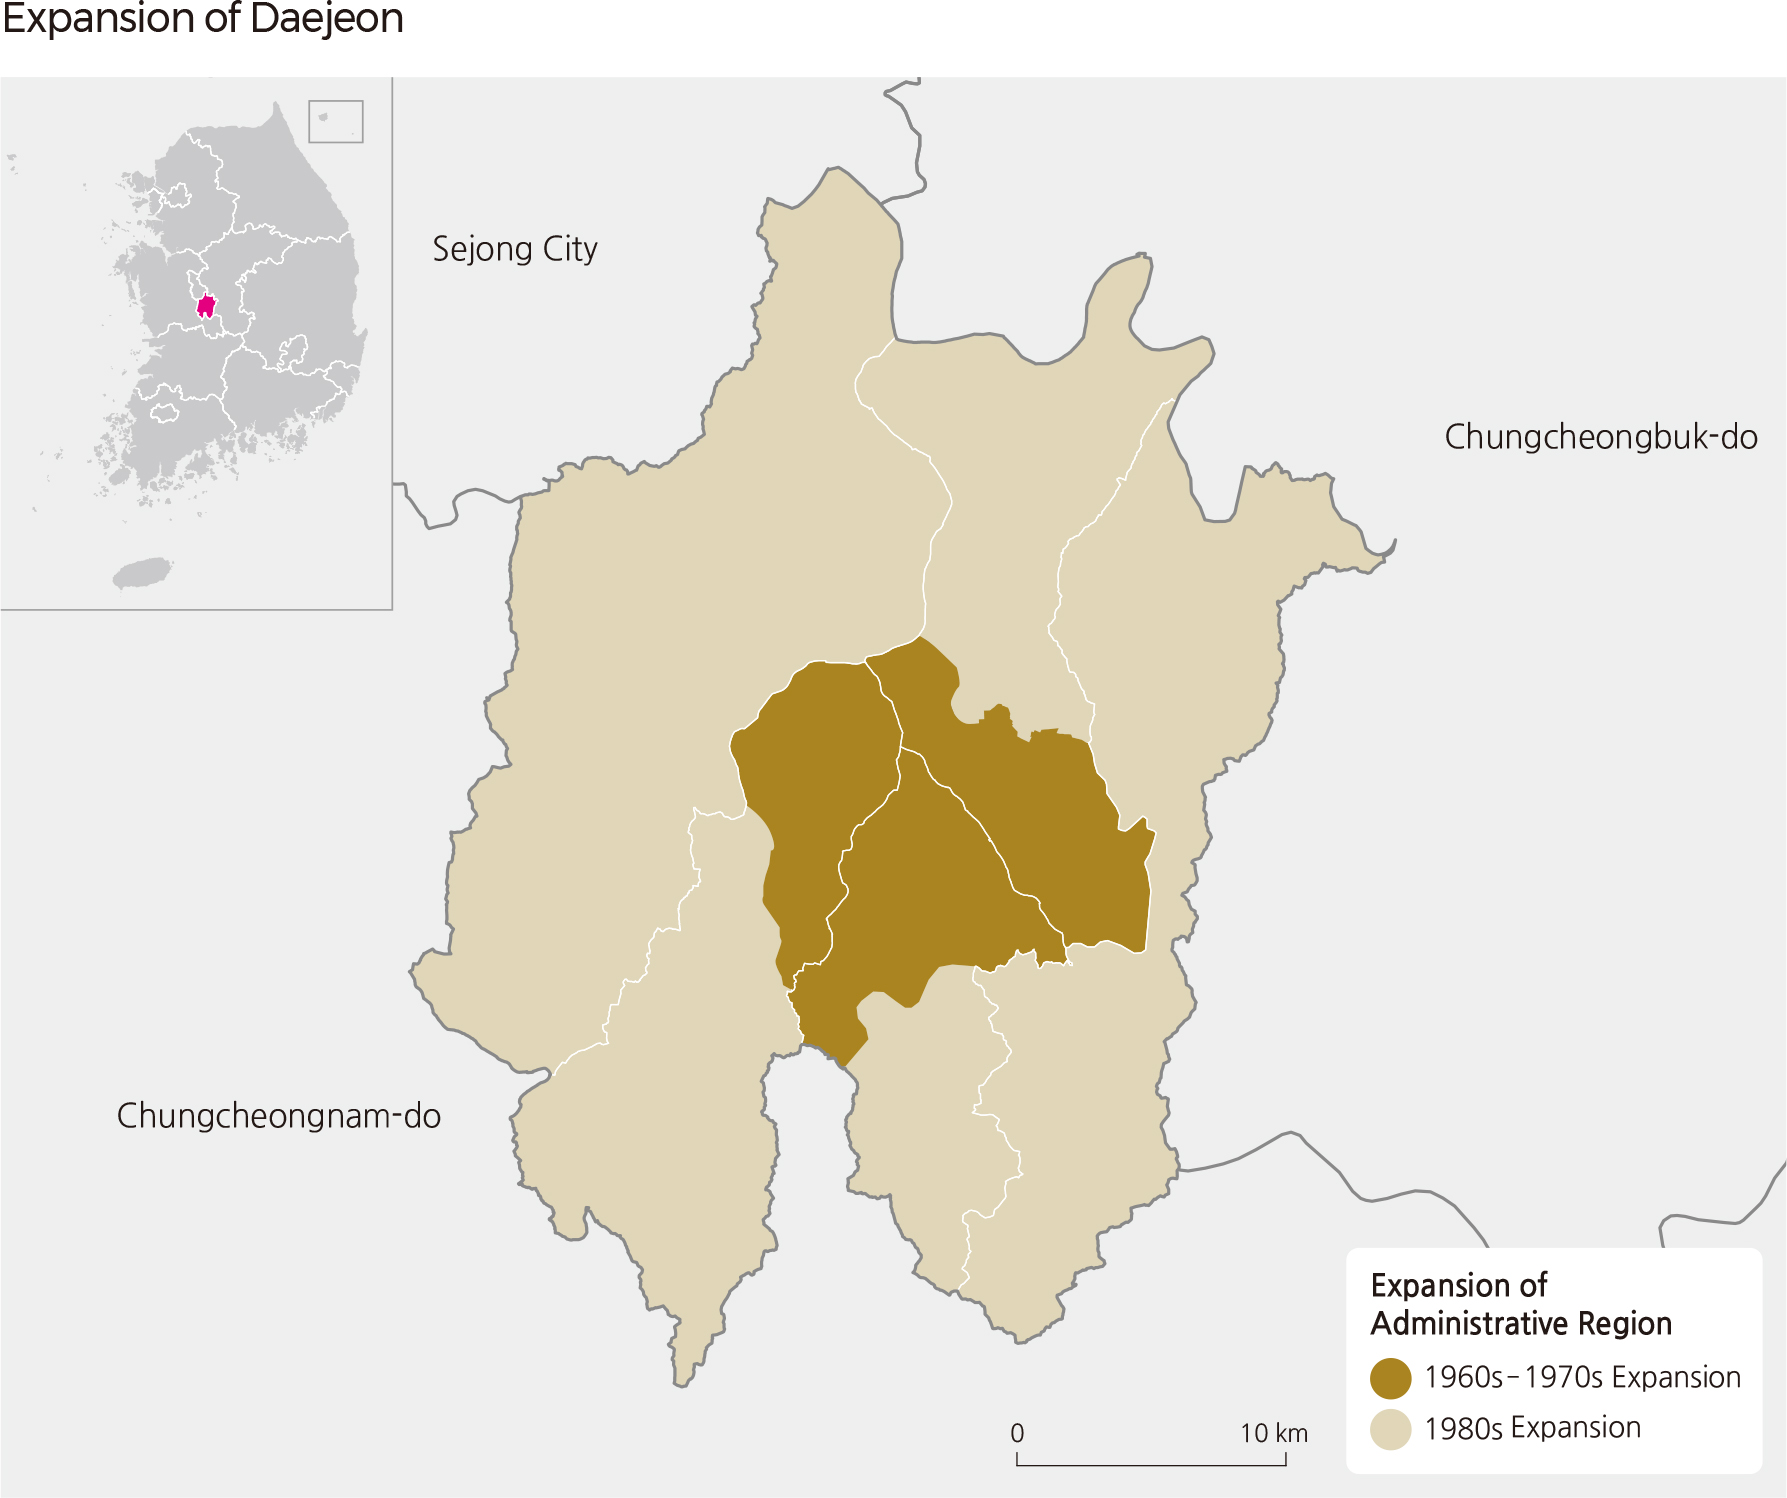 Expansion of Daejeon